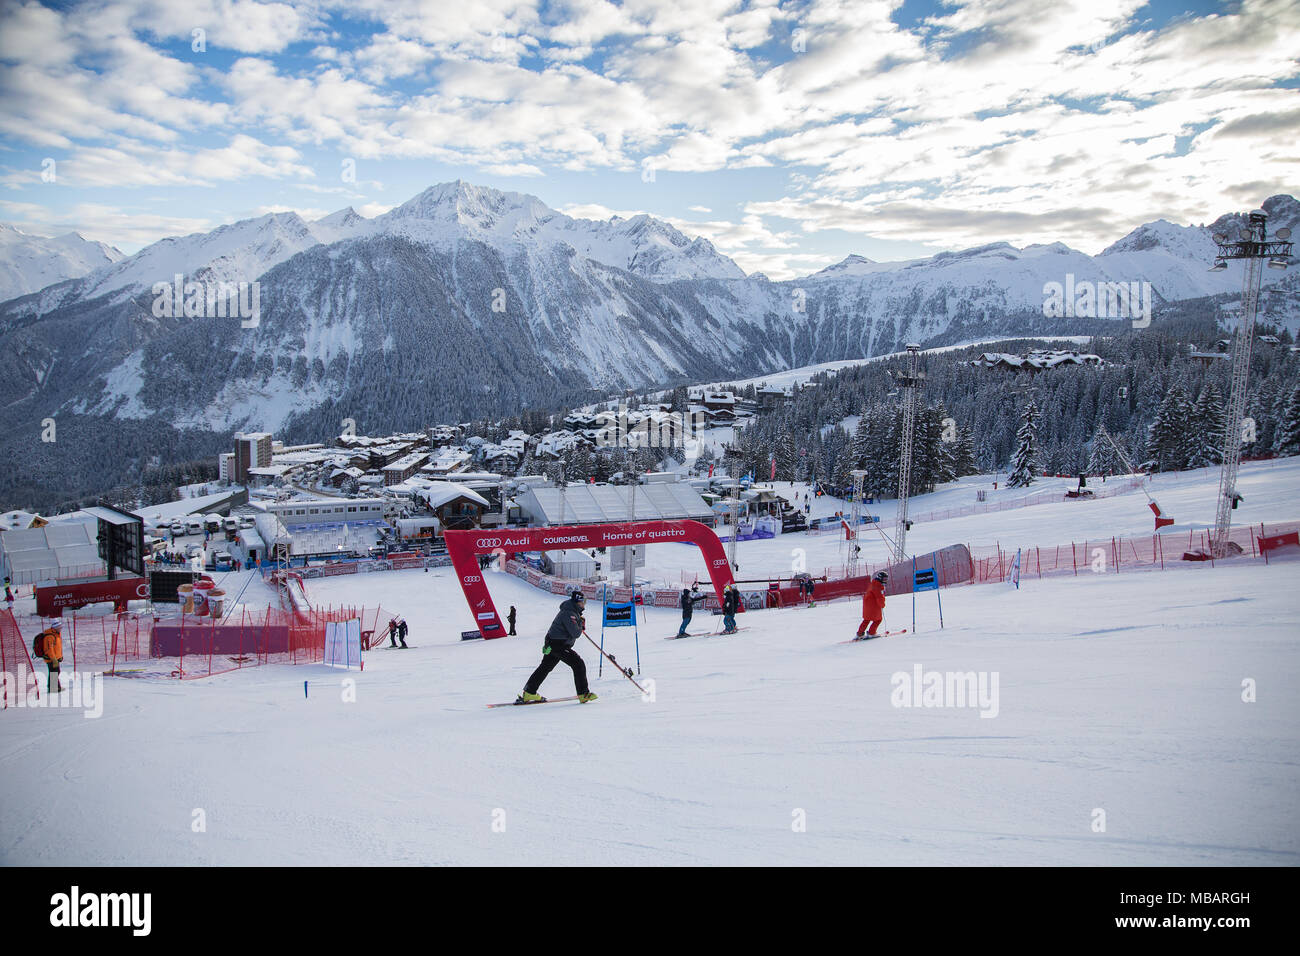 The slalom stadium of Courchevel 1850 during the course inspection of the Audi Fis Alpine Ski World Cup Women's Giant Slalom on the 20th Dcember 2017 Stock Photo